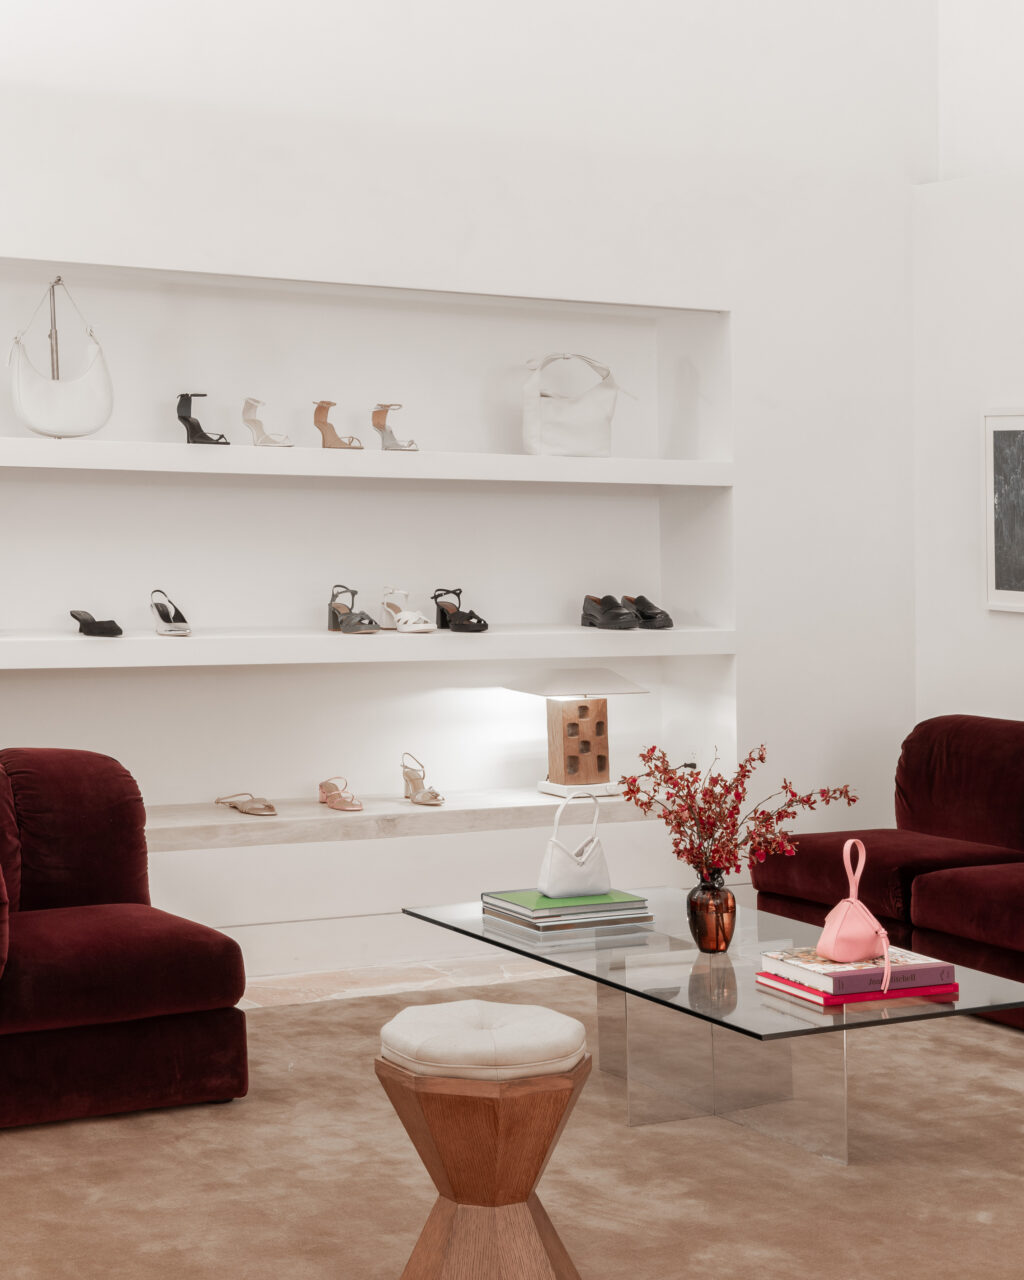 The shoe section of a store features furniture set up like a living room